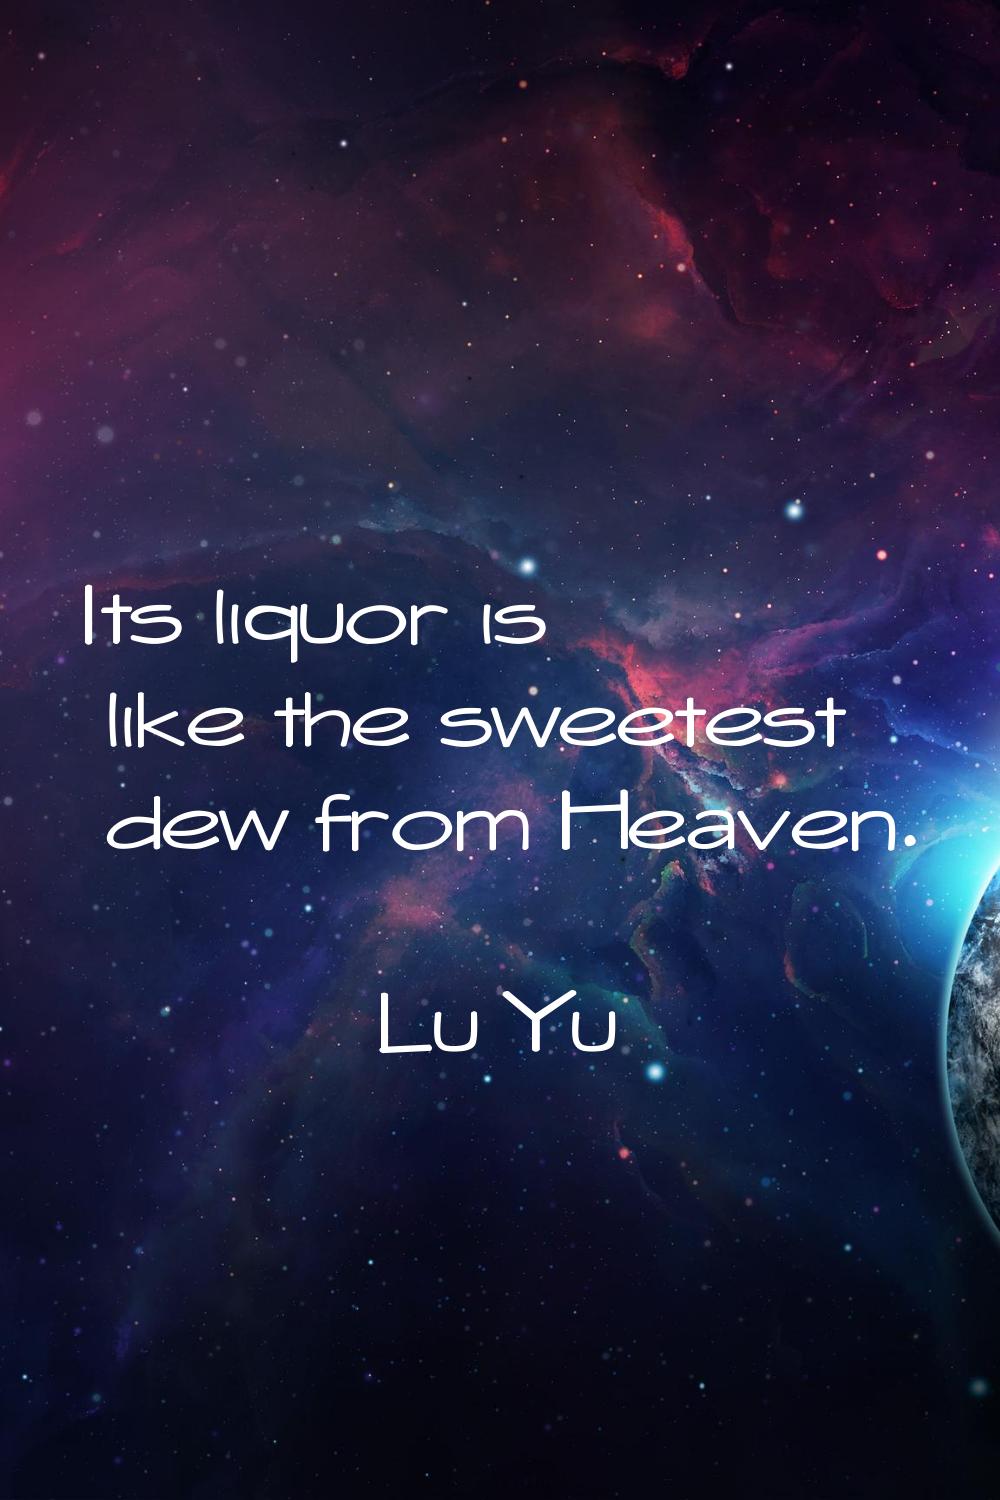 Its liquor is like the sweetest dew from Heaven.